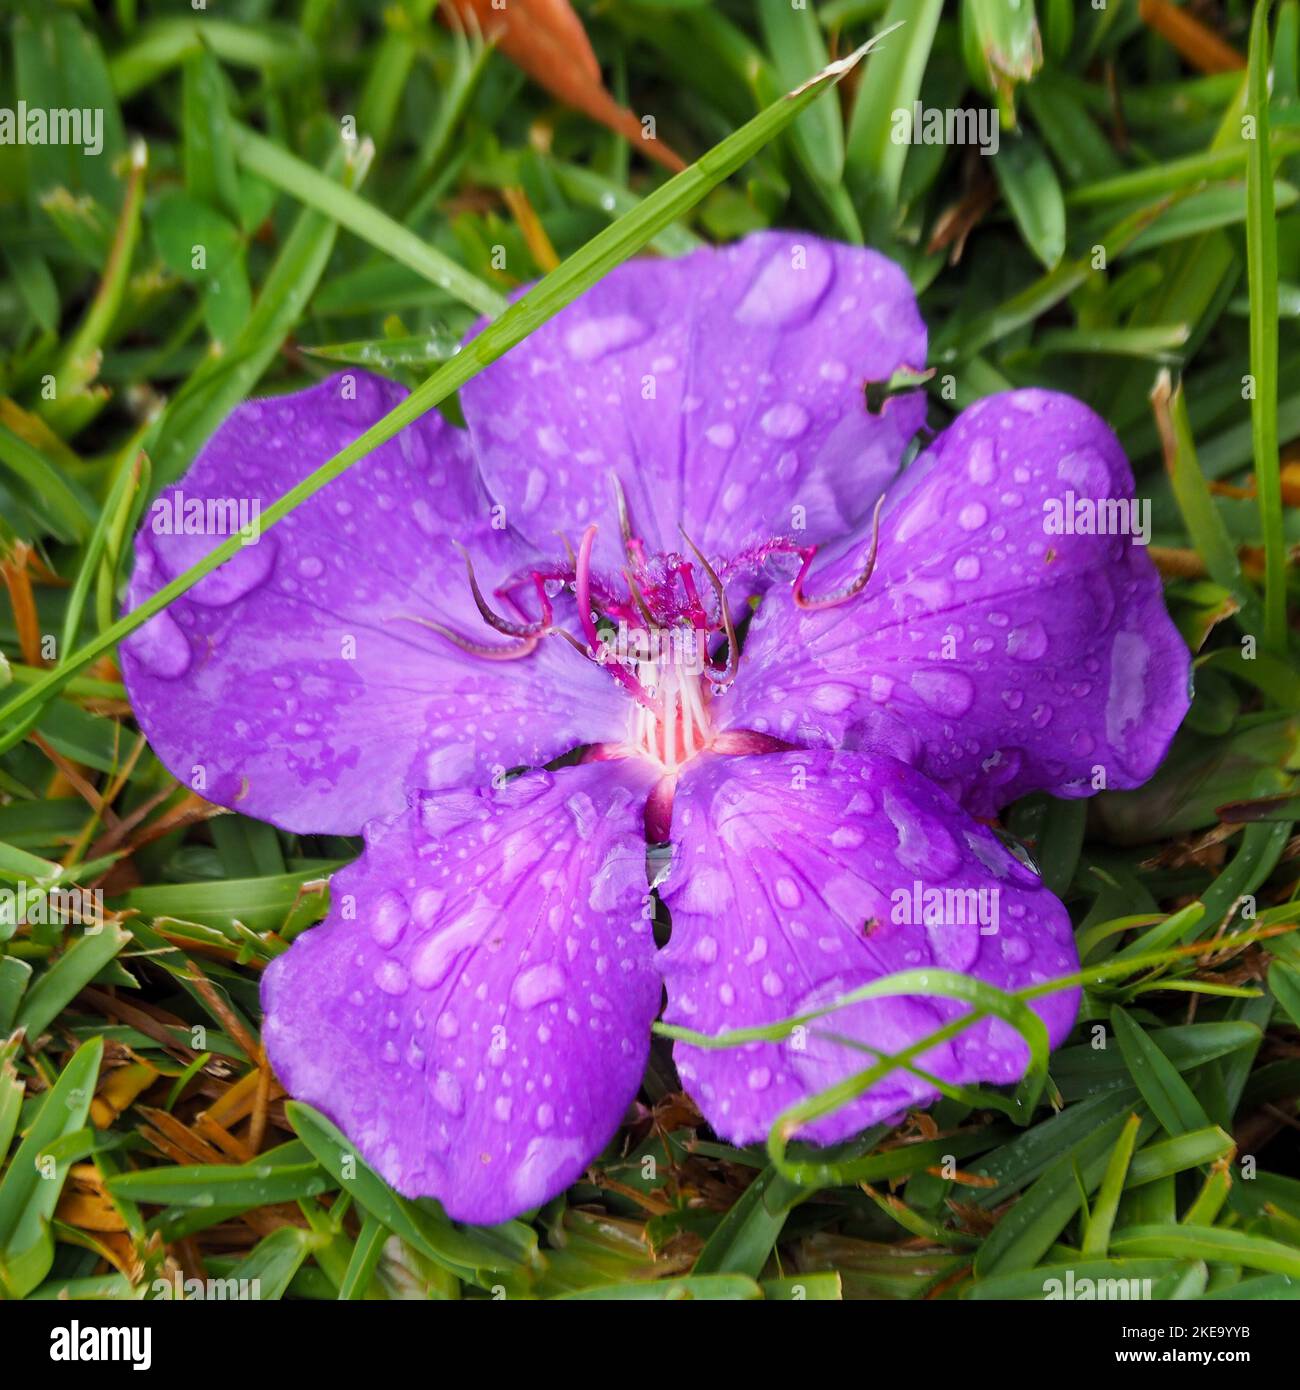 Glorious purple flower on the green grass, a wet Tibouchina, petals covered in droplets, in an Australian coastal sub tropical garden Stock Photo